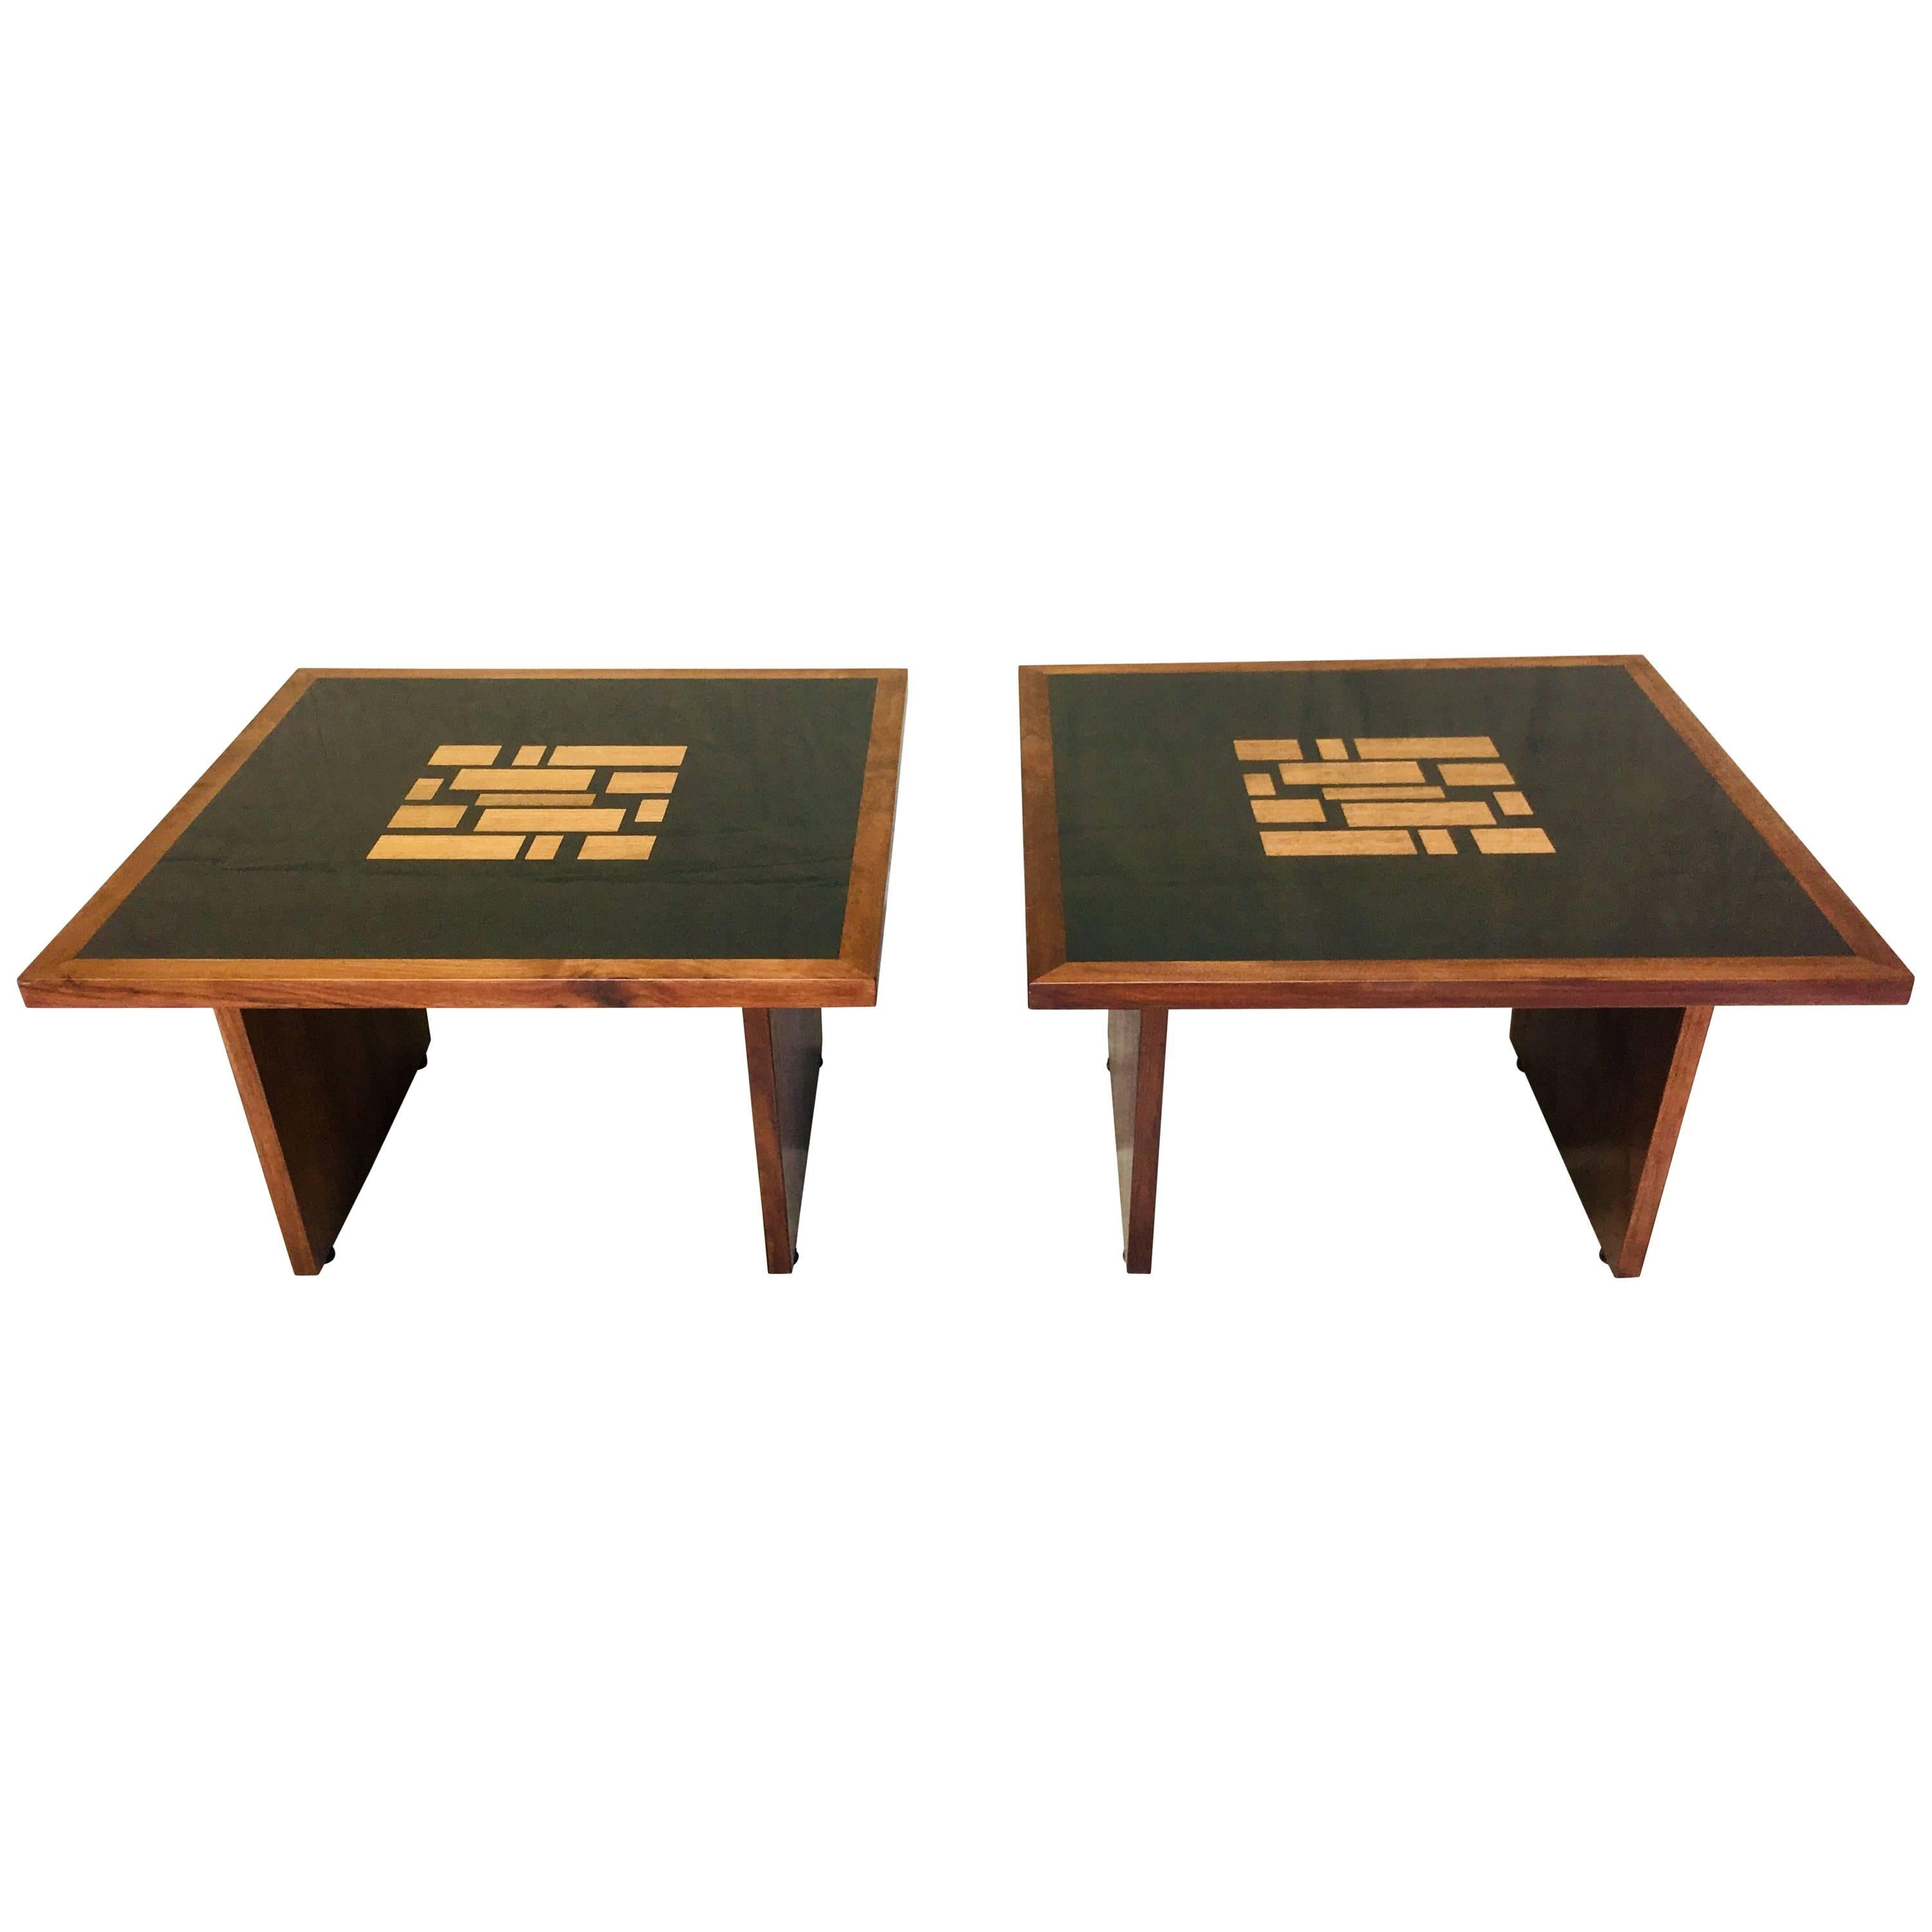 End tables by Frank Rohloff, Walnut with Black inset, California 1960s For Sale